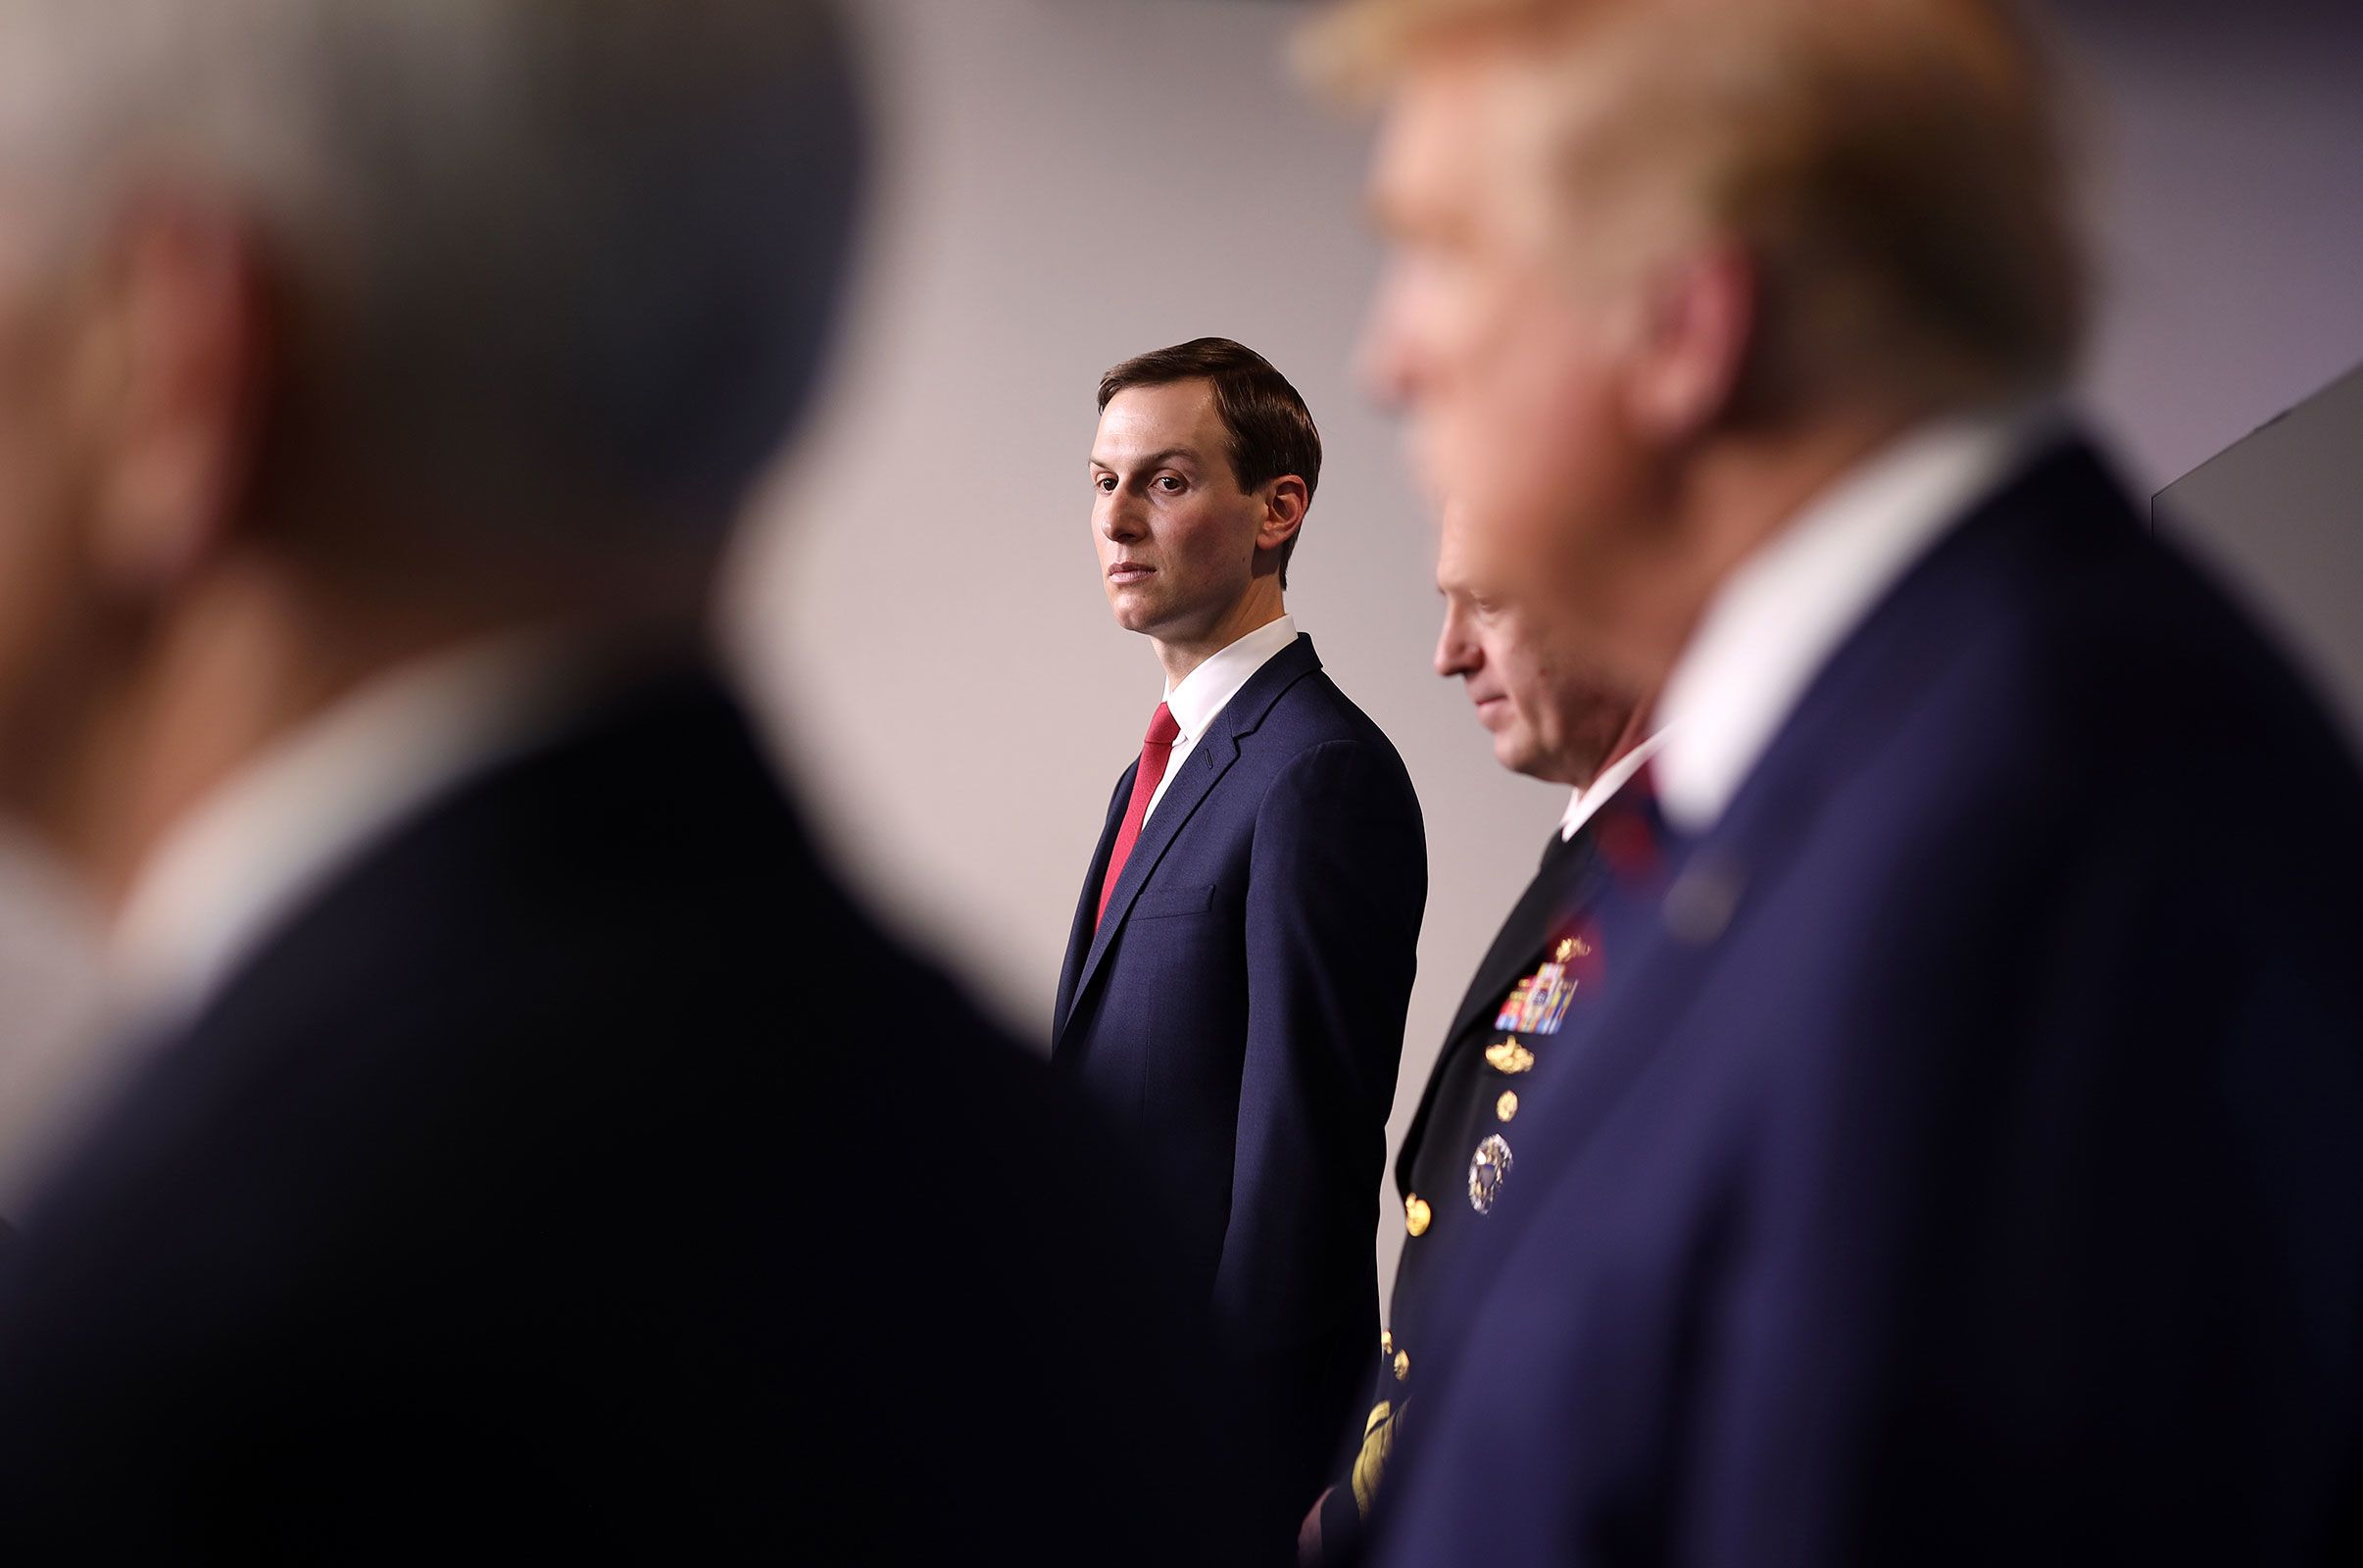 Opinion: What world is Jared Kushner living in? - International News - News